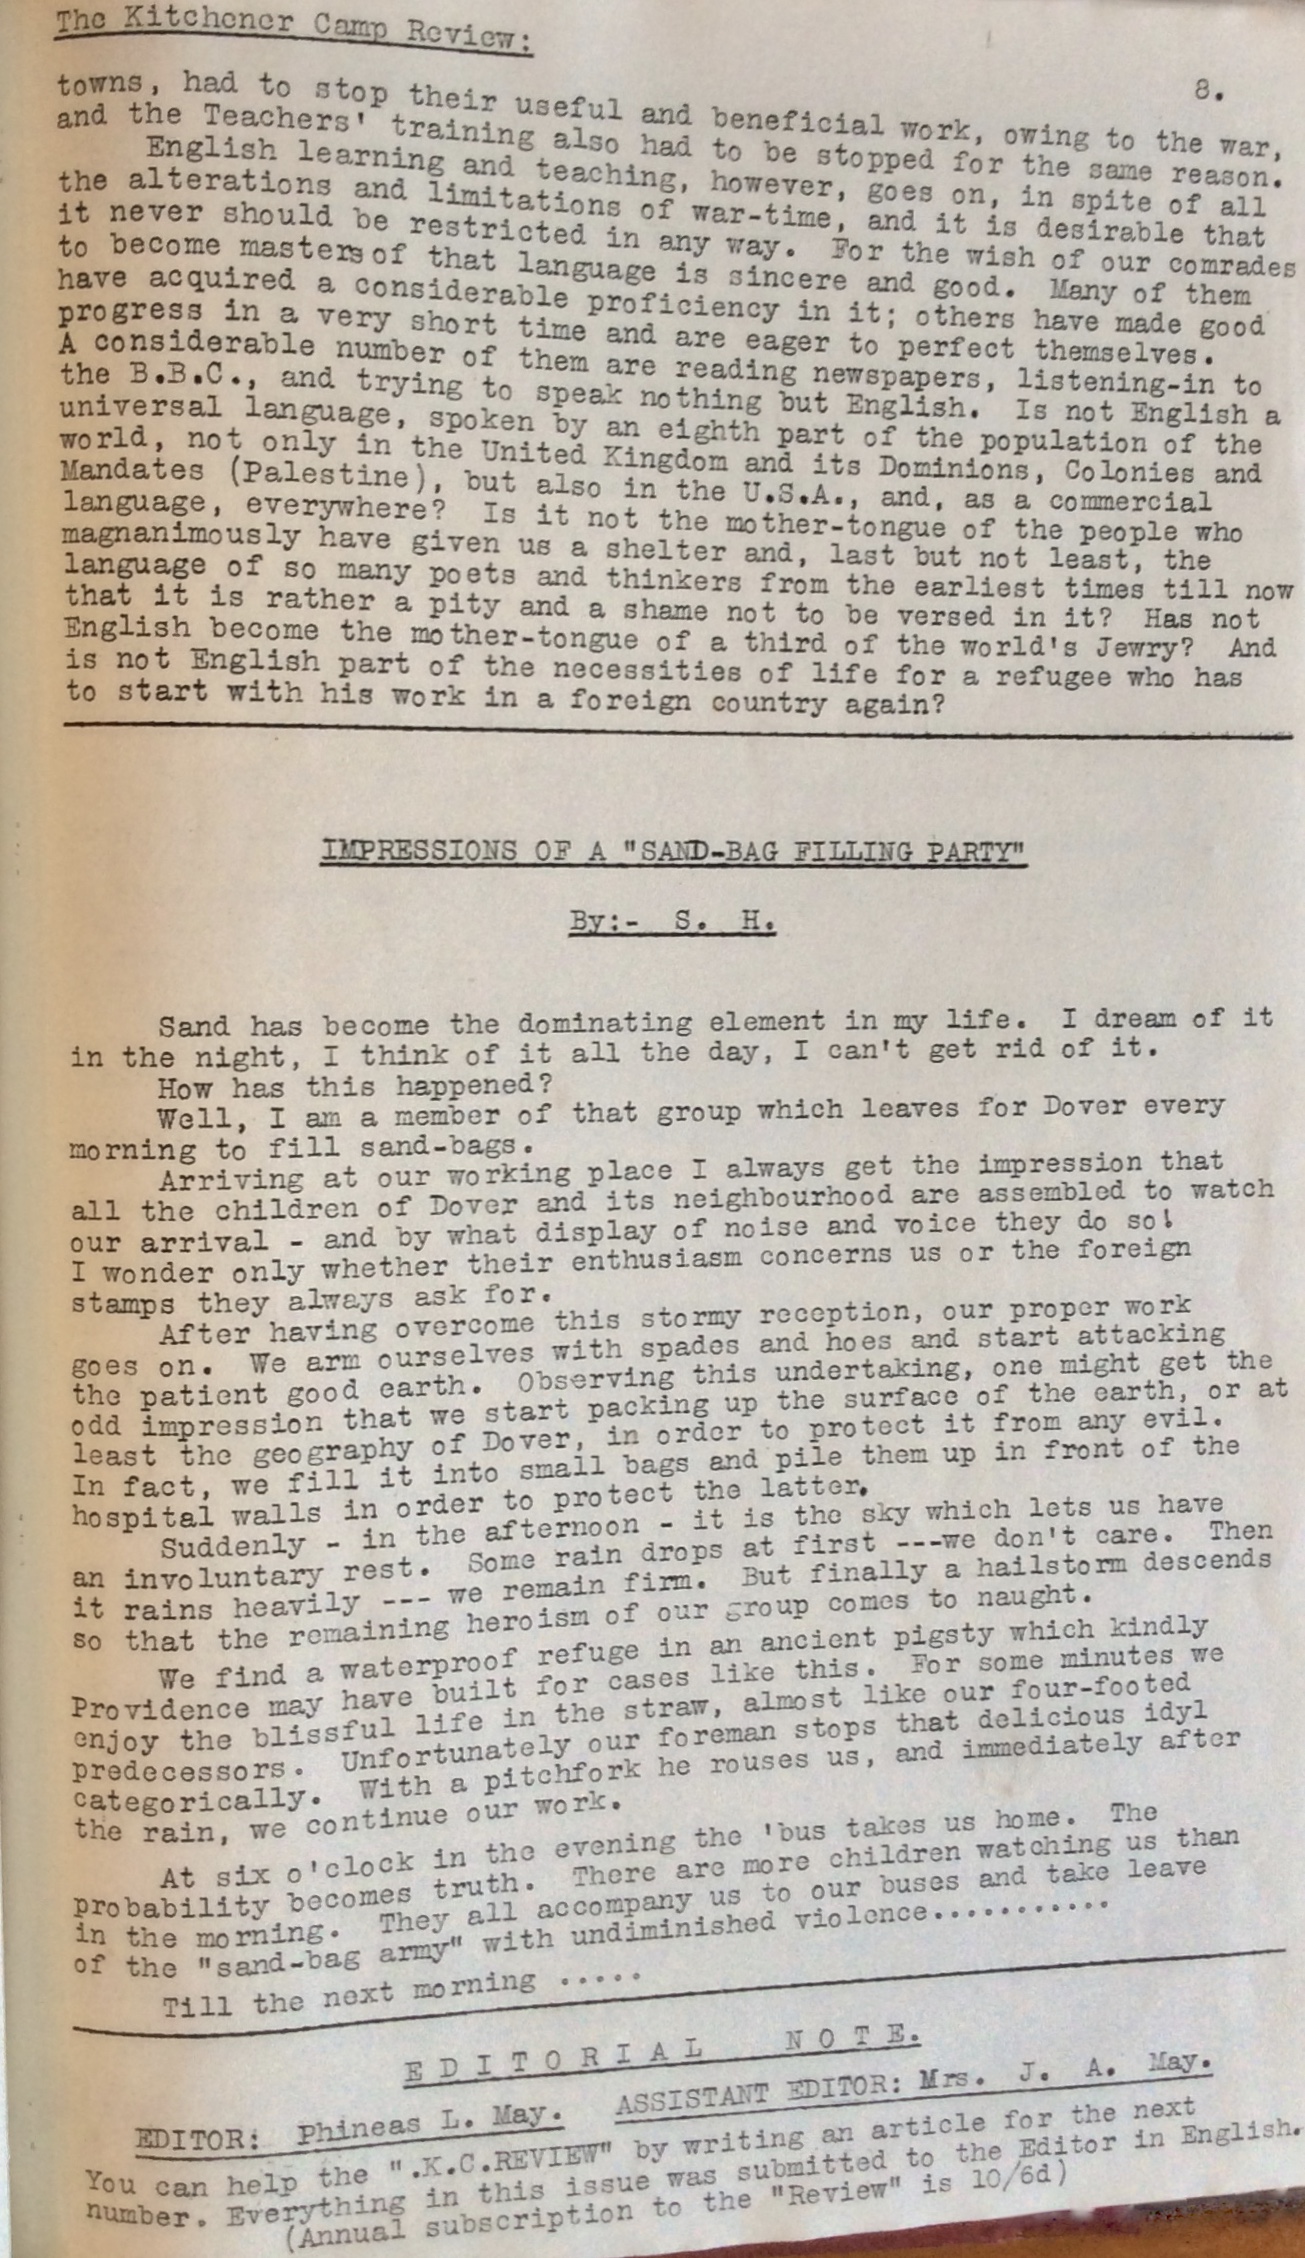 Kitchener Camp Review, October 1939, page 8